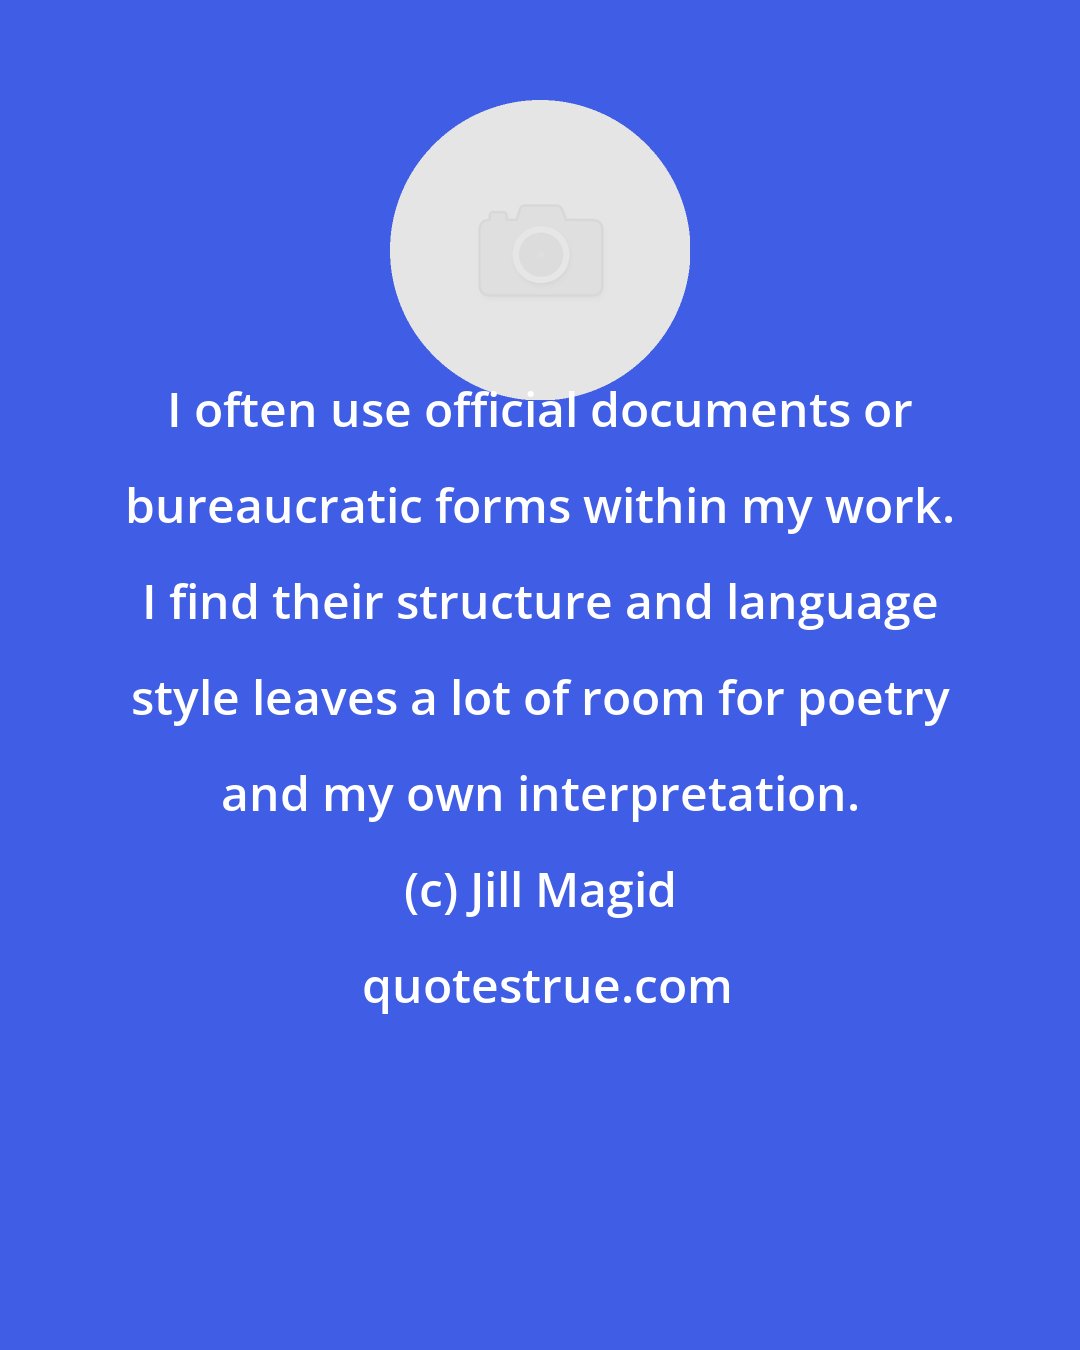 Jill Magid: I often use official documents or bureaucratic forms within my work. I find their structure and language style leaves a lot of room for poetry and my own interpretation.